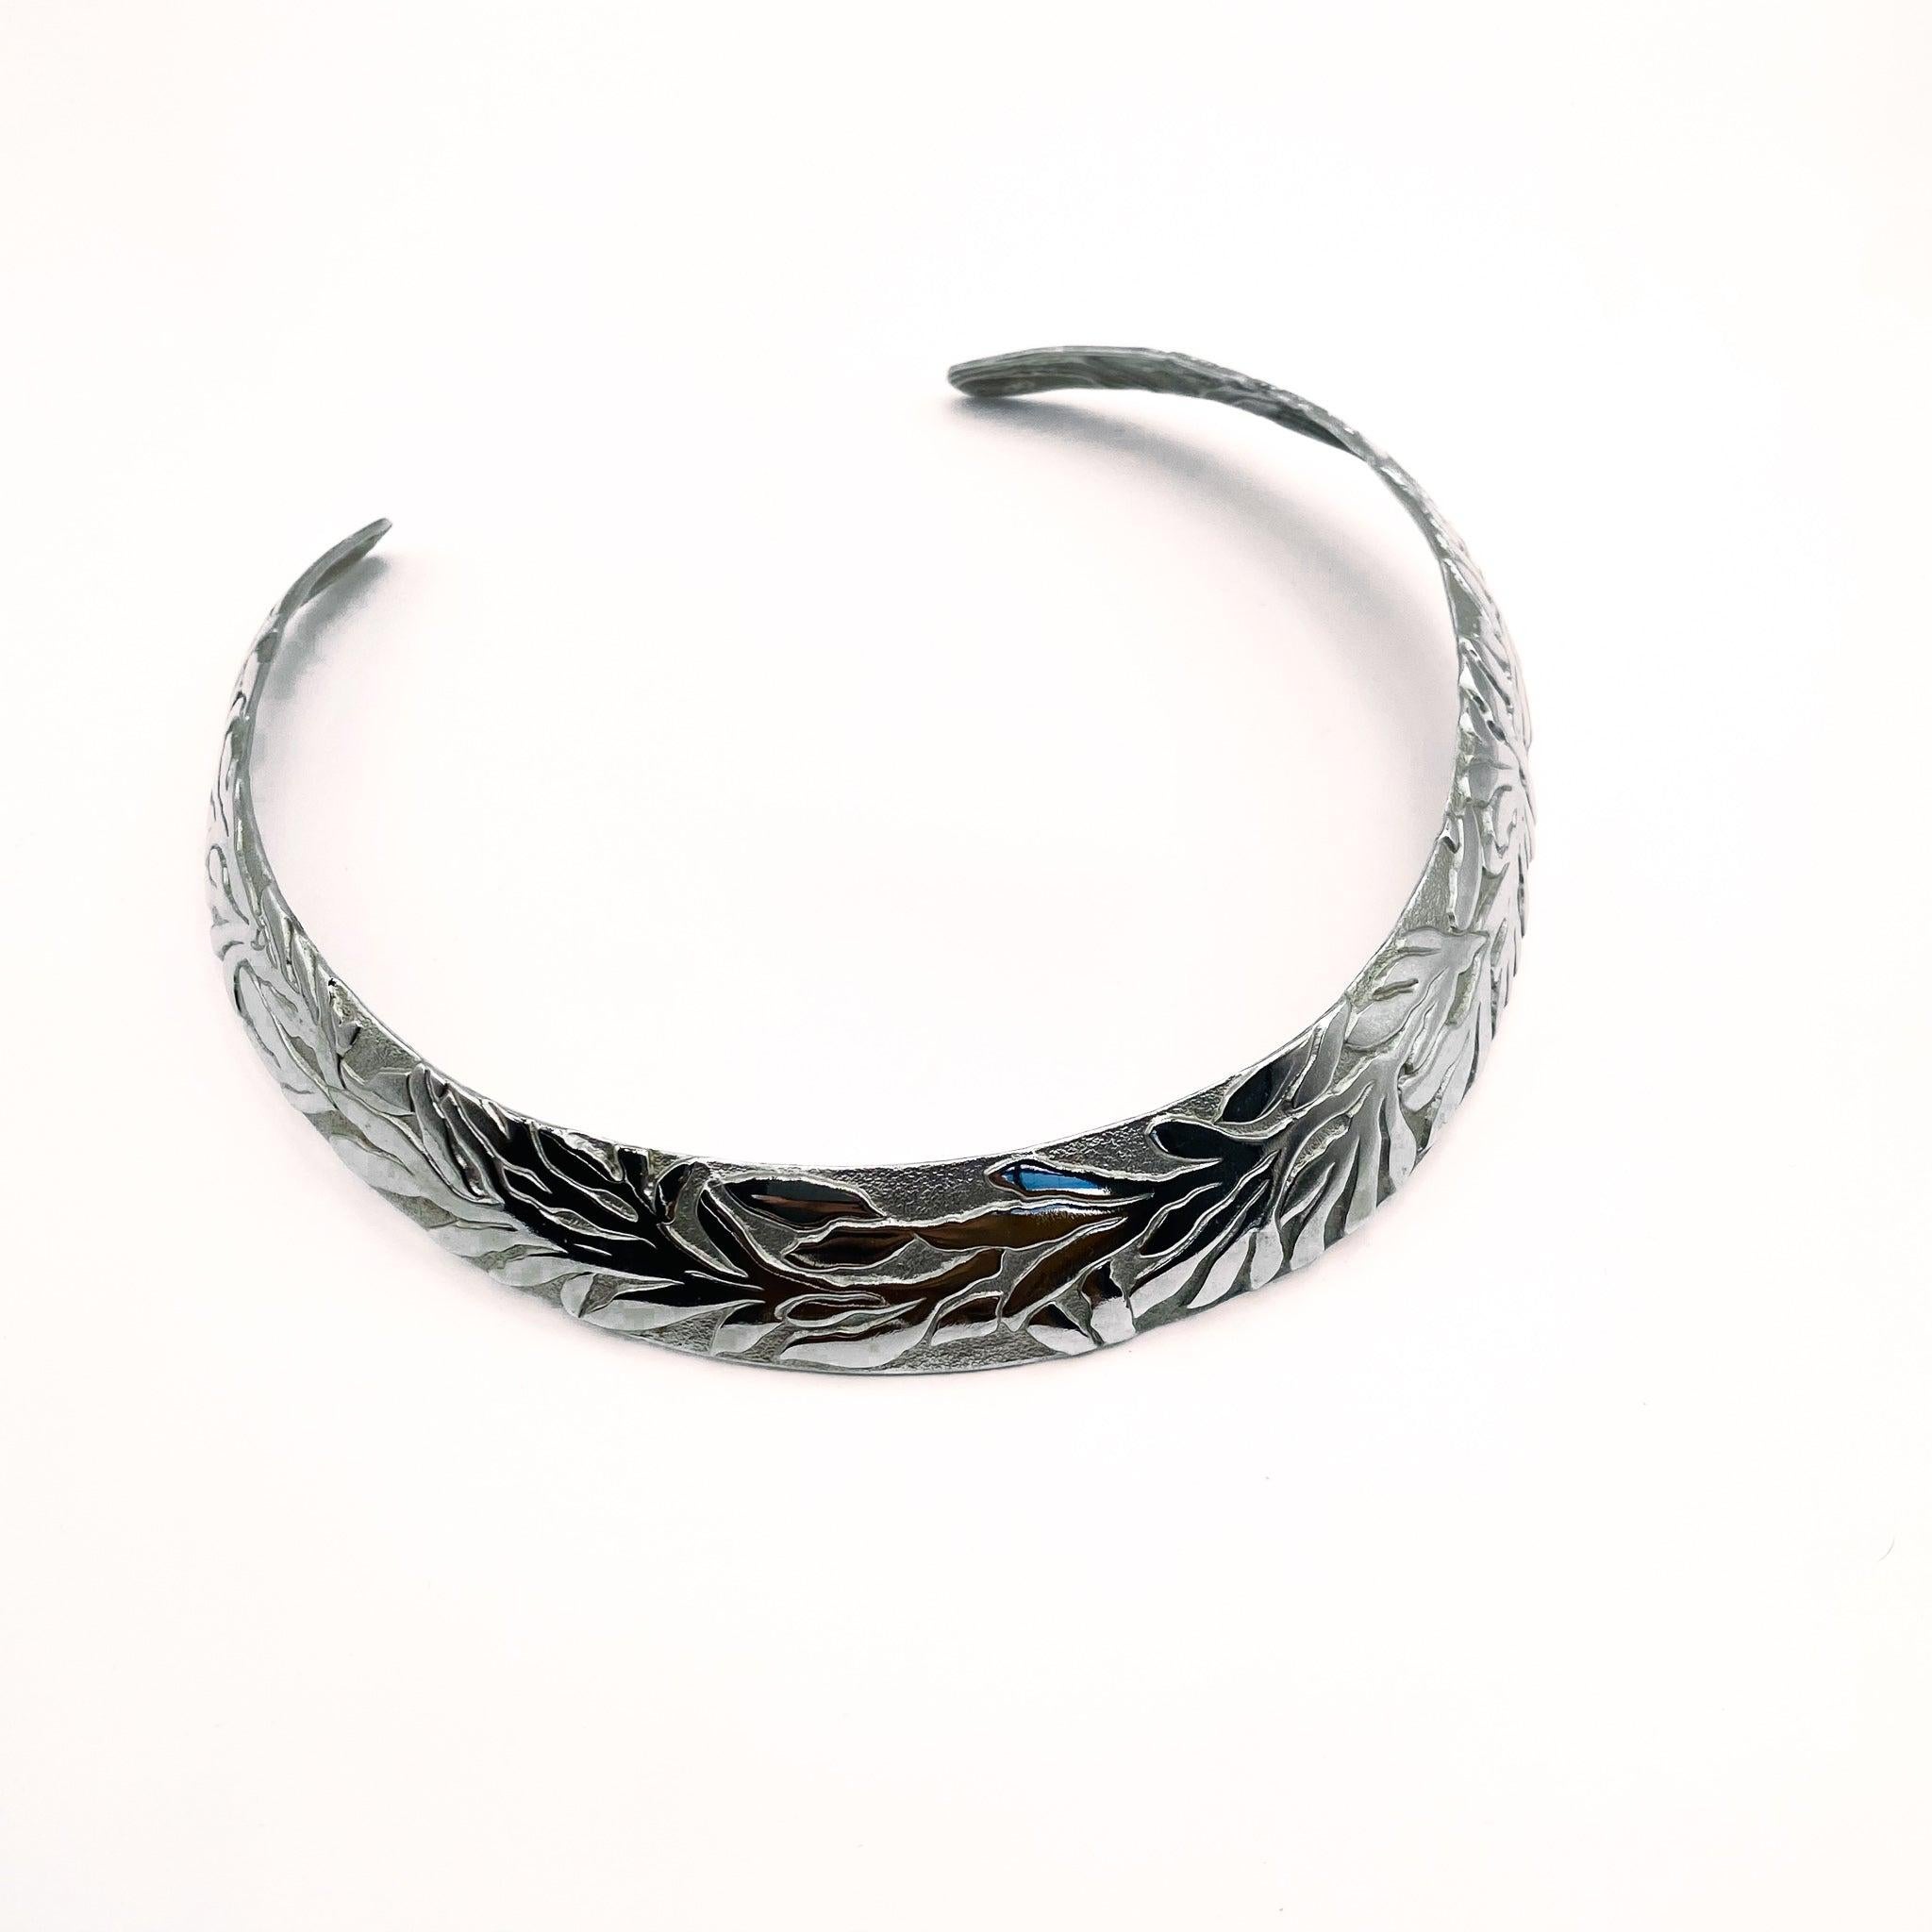 Vintage Lanvin 1980s Necklace

Timelessly elegant collar necklace from the House of Lanvin. Made in Germany in the 1980s, the incredible necklace is crafted from silver plated metal.

The story of Lanvin began in 1889, at a small hat shop in the